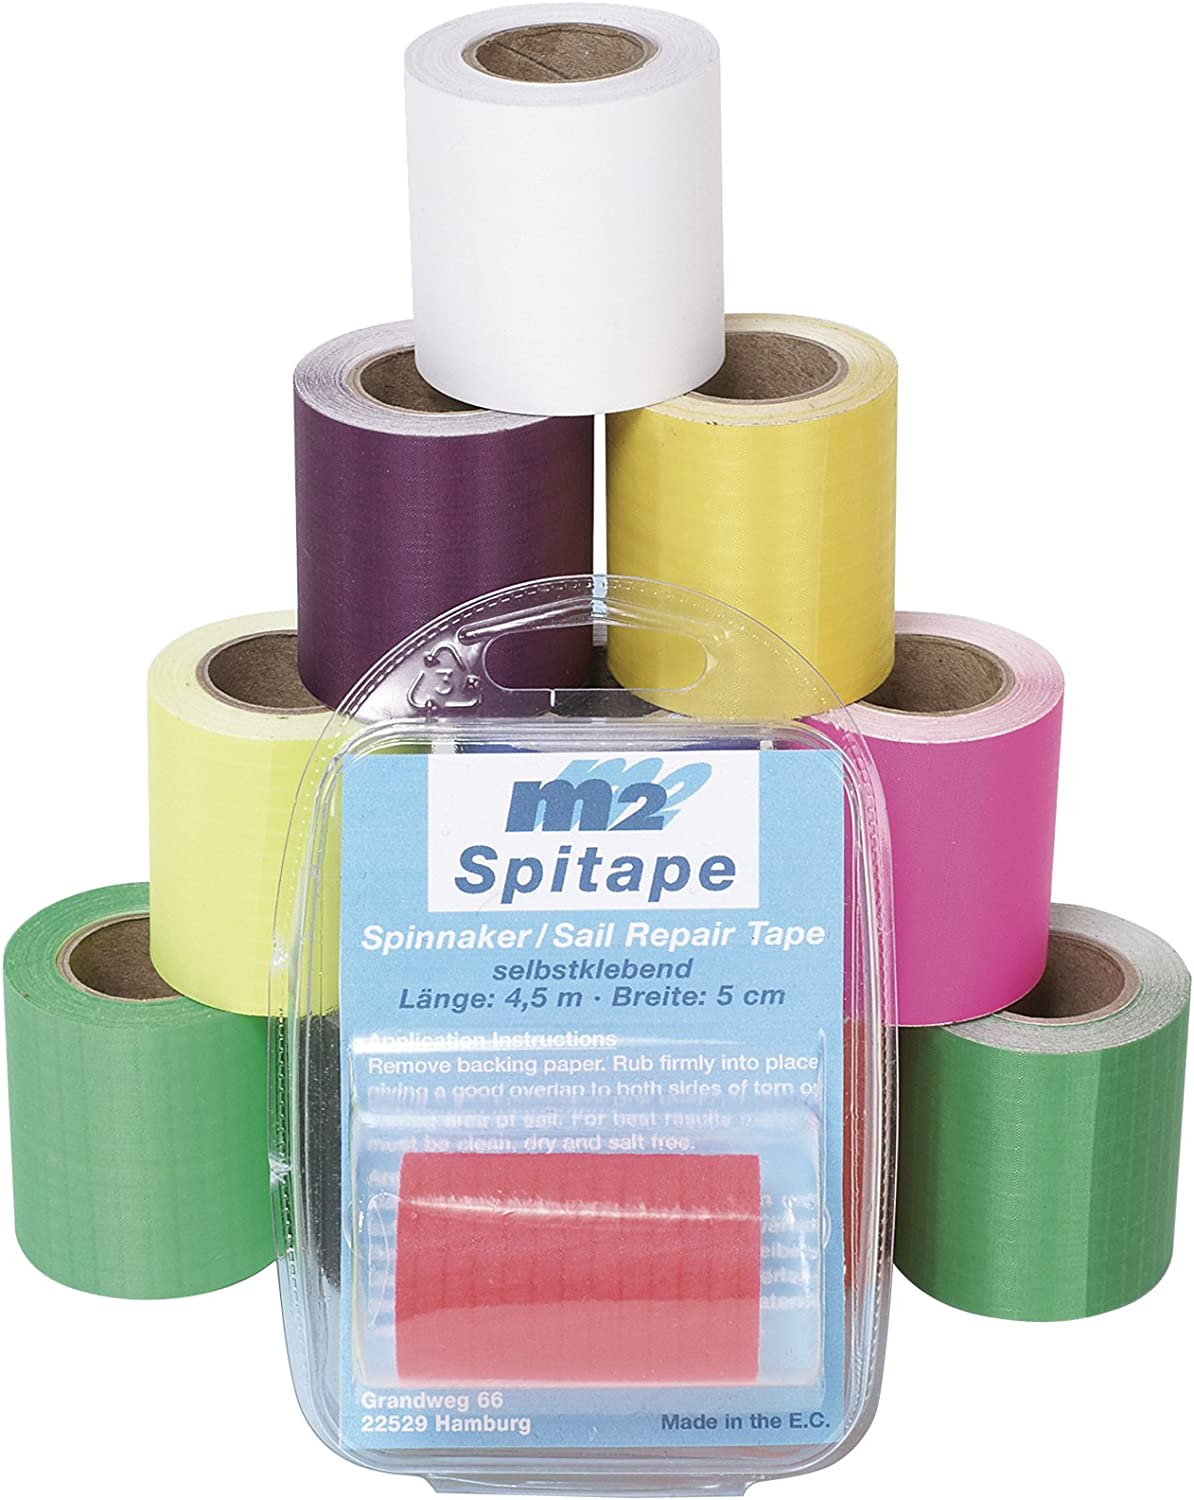 Spitape ripstop kite and wing repair tape 4.5mt long